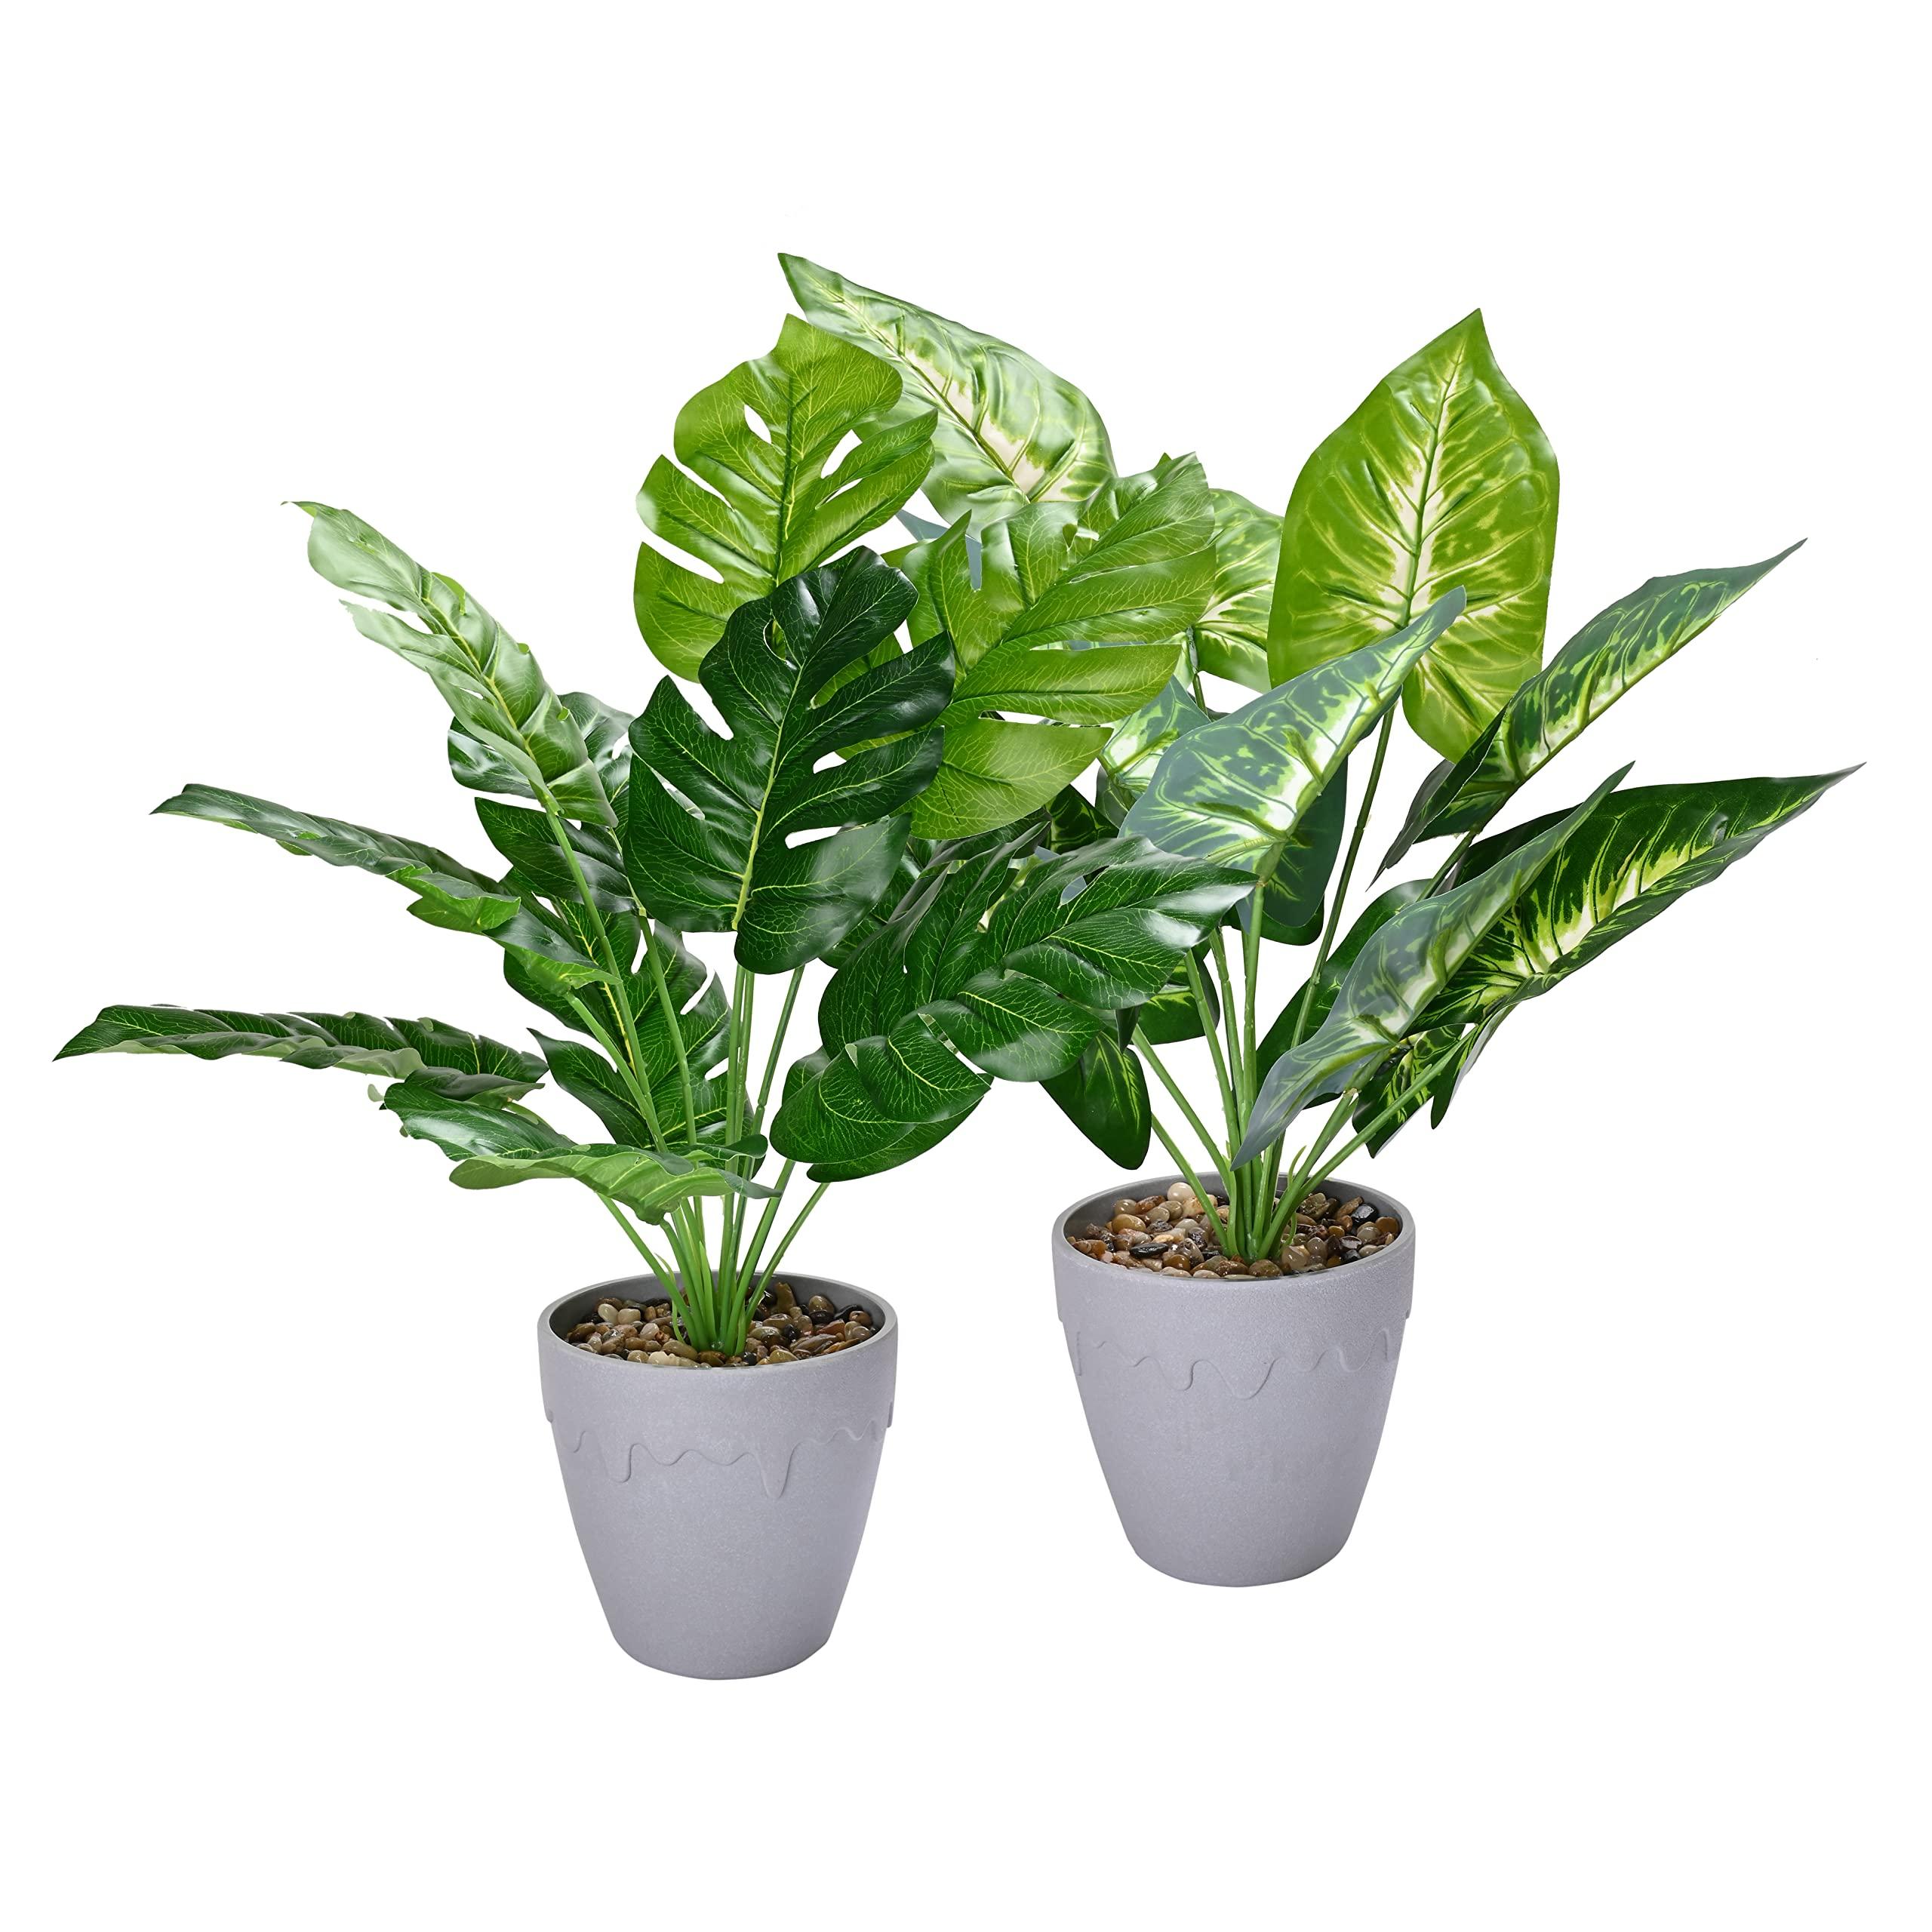 Yorkmills Fake Plants in Pot Artifical Plants Indoor Artificial Potted Plant for Bedroom Faux Plants Calathea Orbifolia Monstera Deliciosa Greenery Cheese Plants